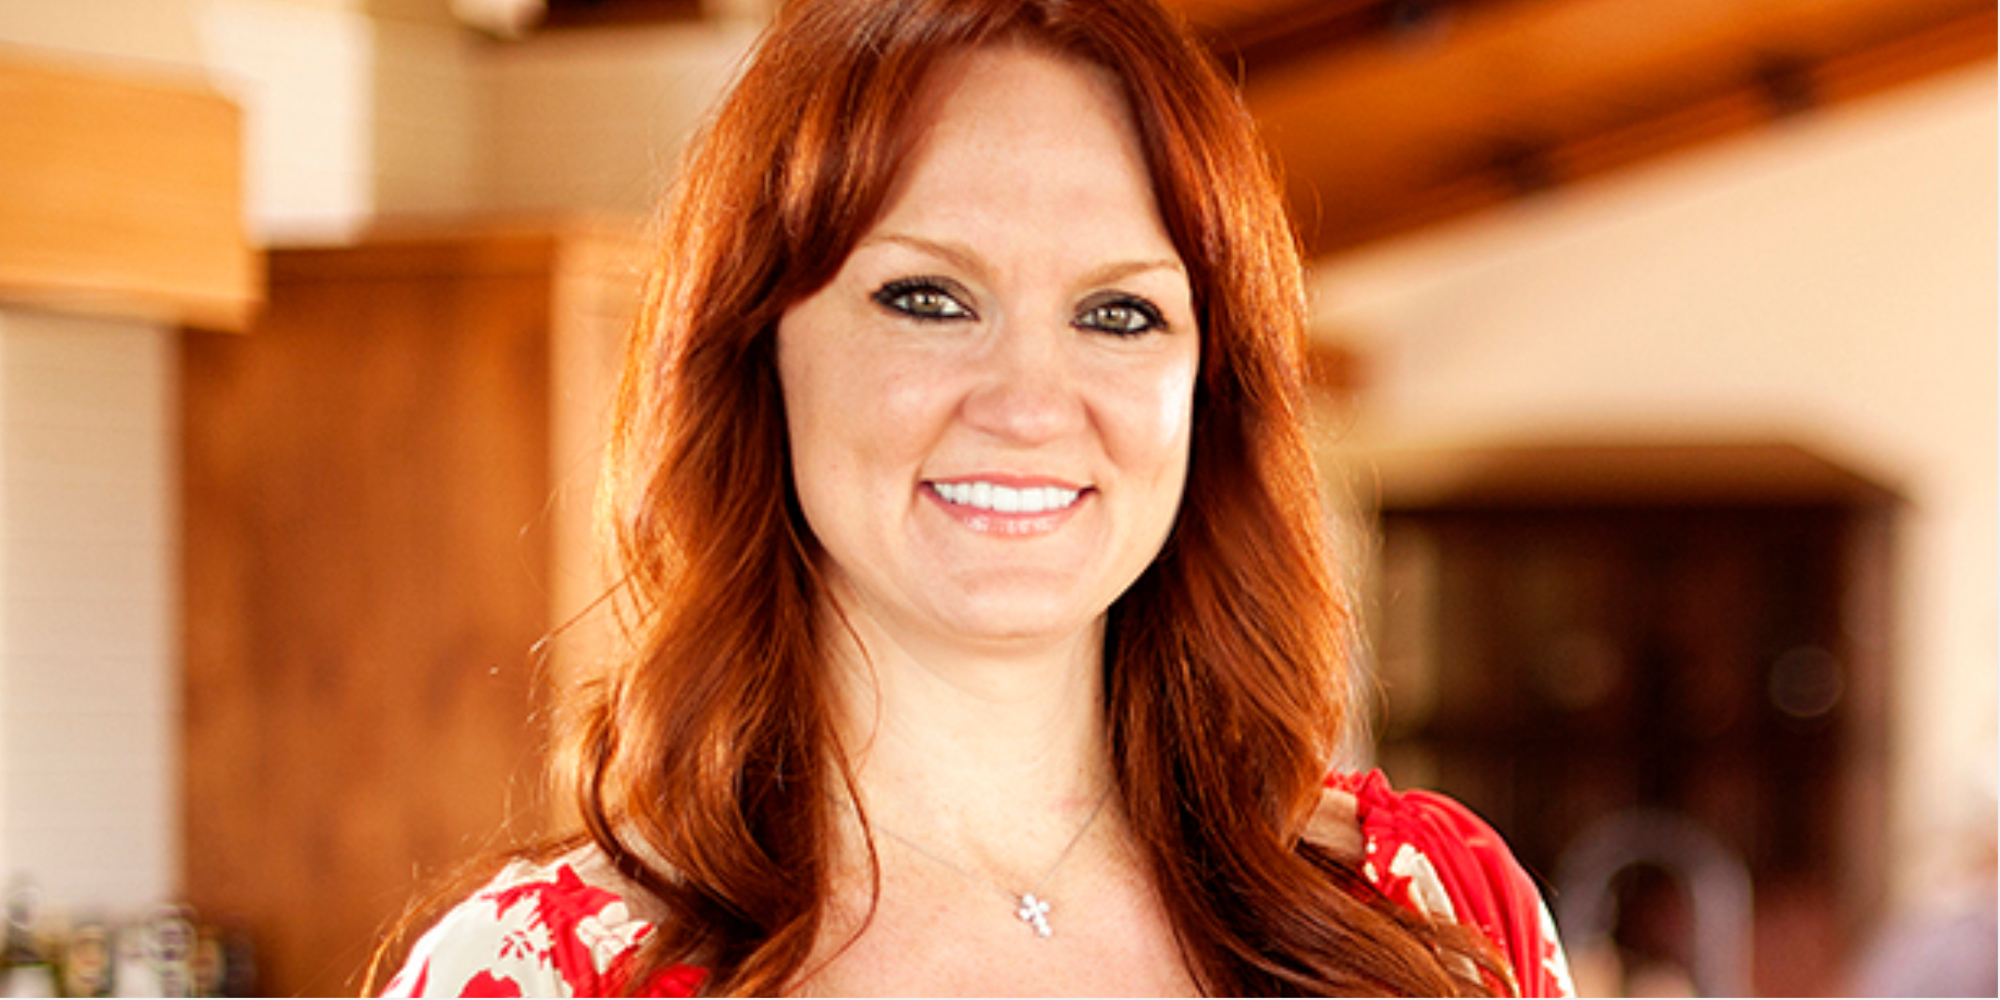 Ree Drummond poses in her lodge kitchen on the set of Food Network's 'The Pioneer Woman.'